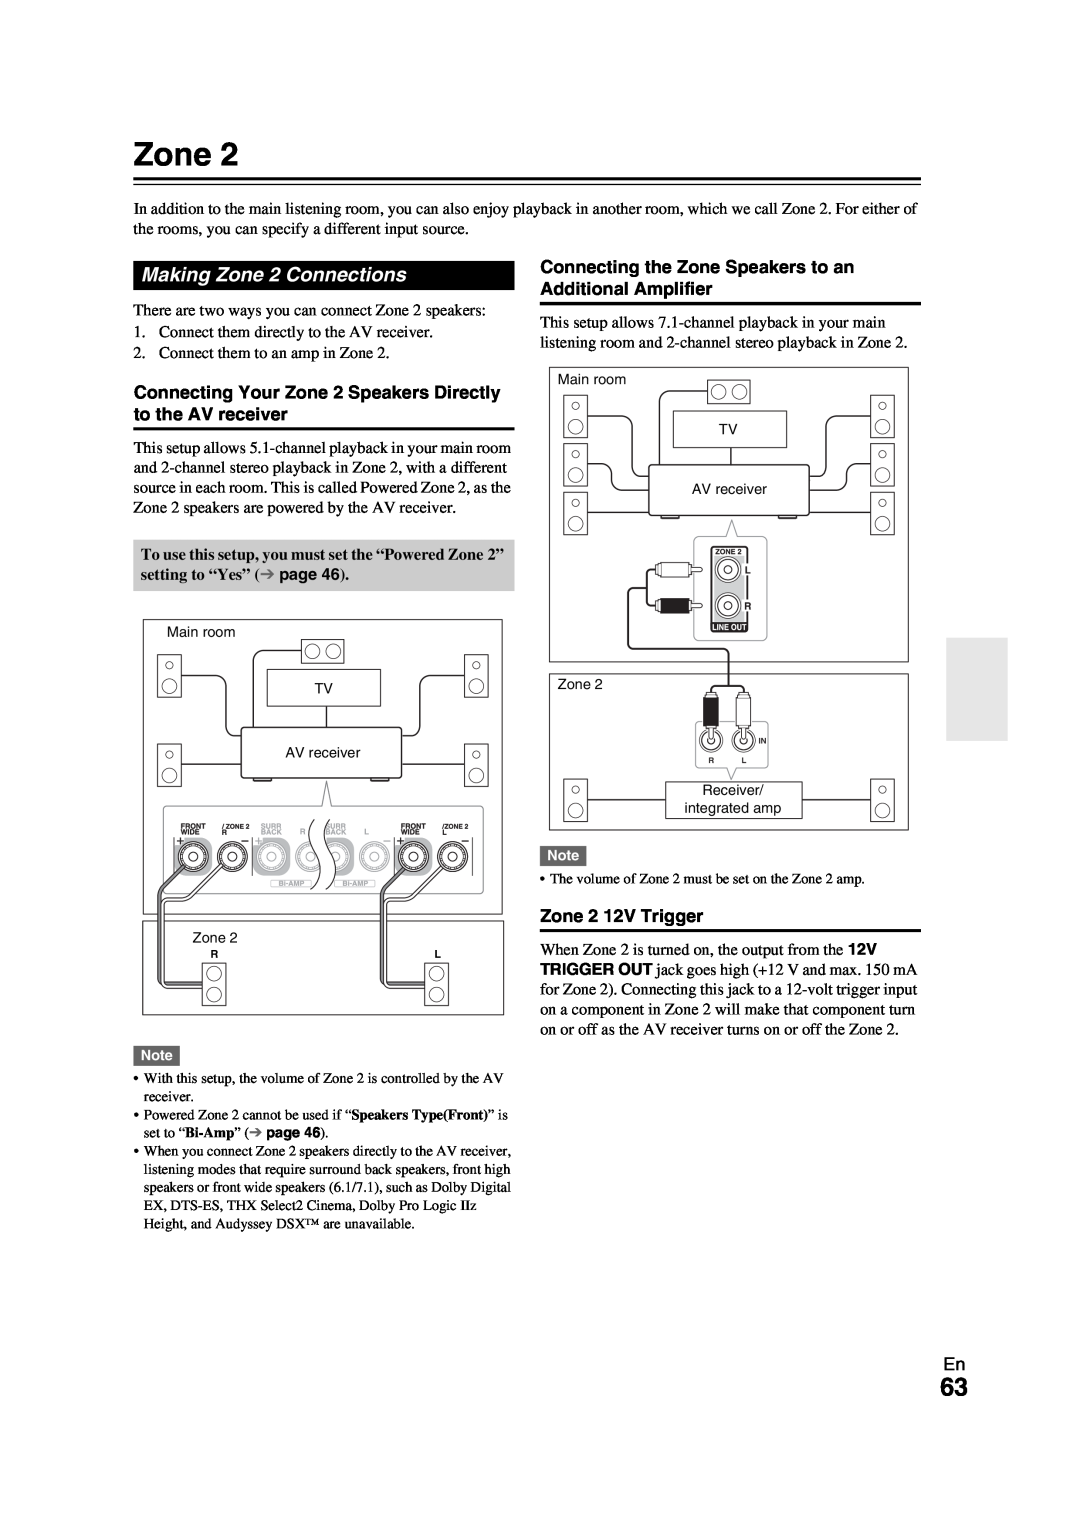 Onkyo TX-NR709 instruction manual Making Zone 2 Connections 